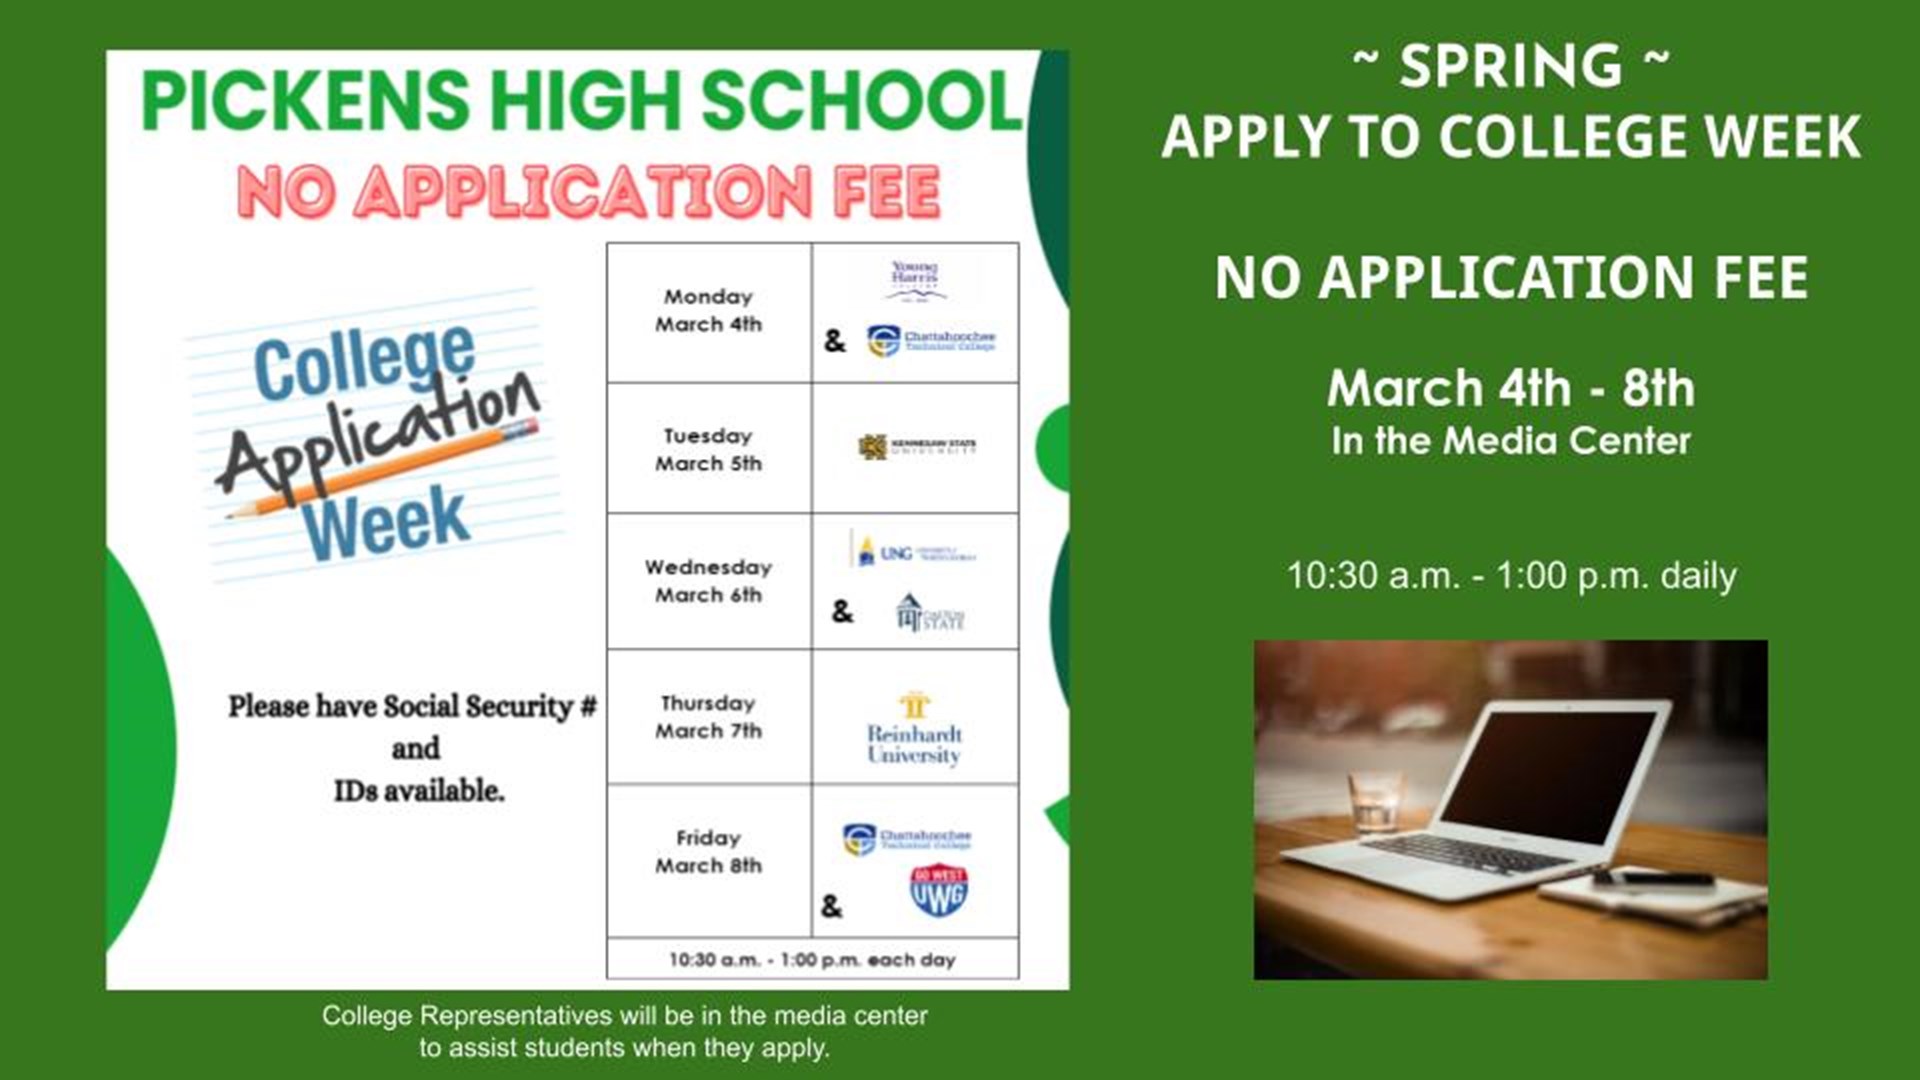 APPLY TO COLLEGE WEEK